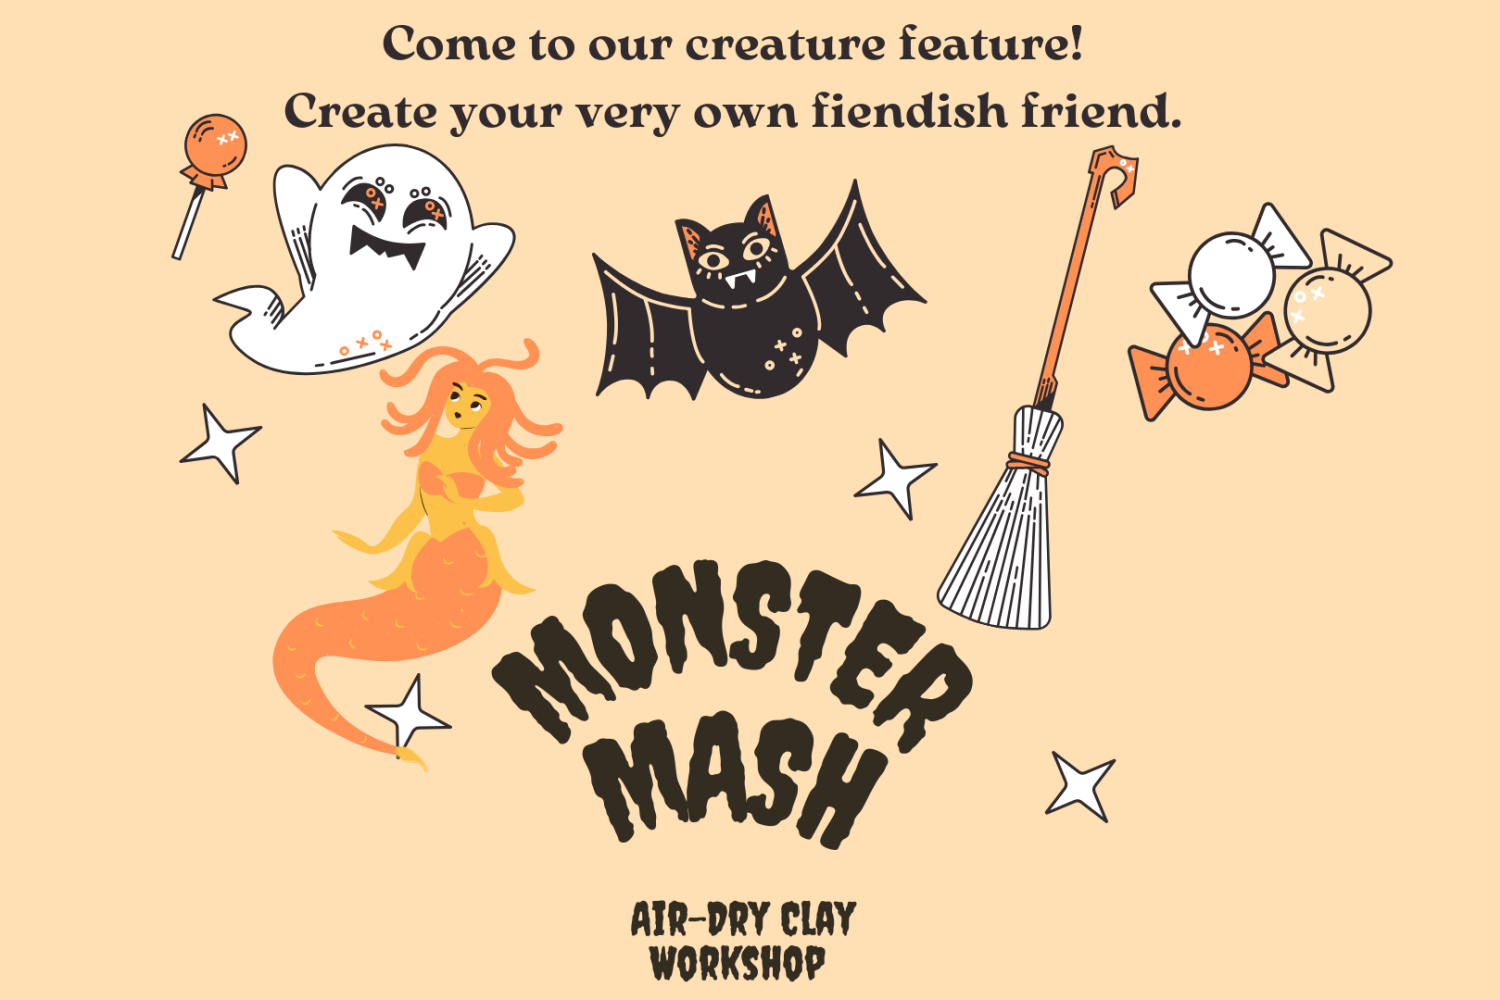 Black, white, and orange clipart of a ghost, a bat, Halloween candy, a brook, and a gorgon on a pale orange brackground. In black, text reads "Come to our creature feature! Creature your very own fiendish friend. Monster Mash air-dry clay workshop."